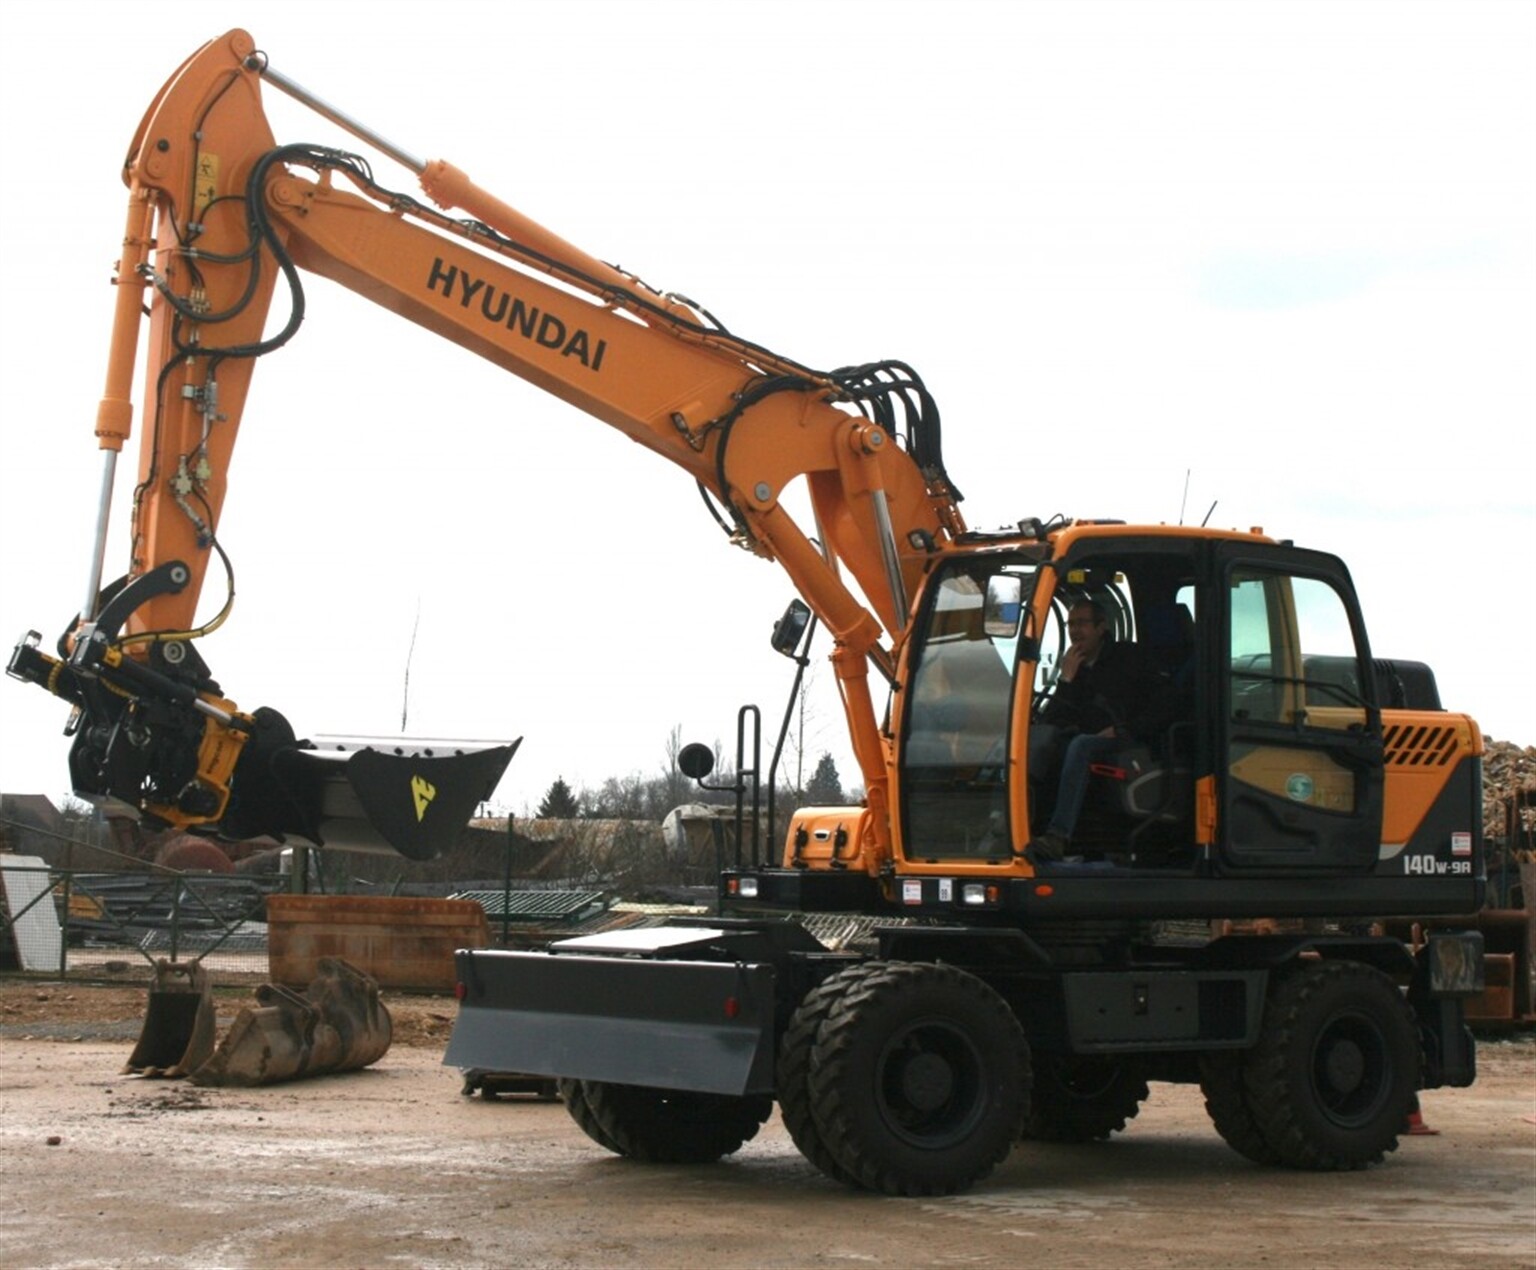 A new Hyundai R140W-9A rubber duck Joins the Rodeschini family business.